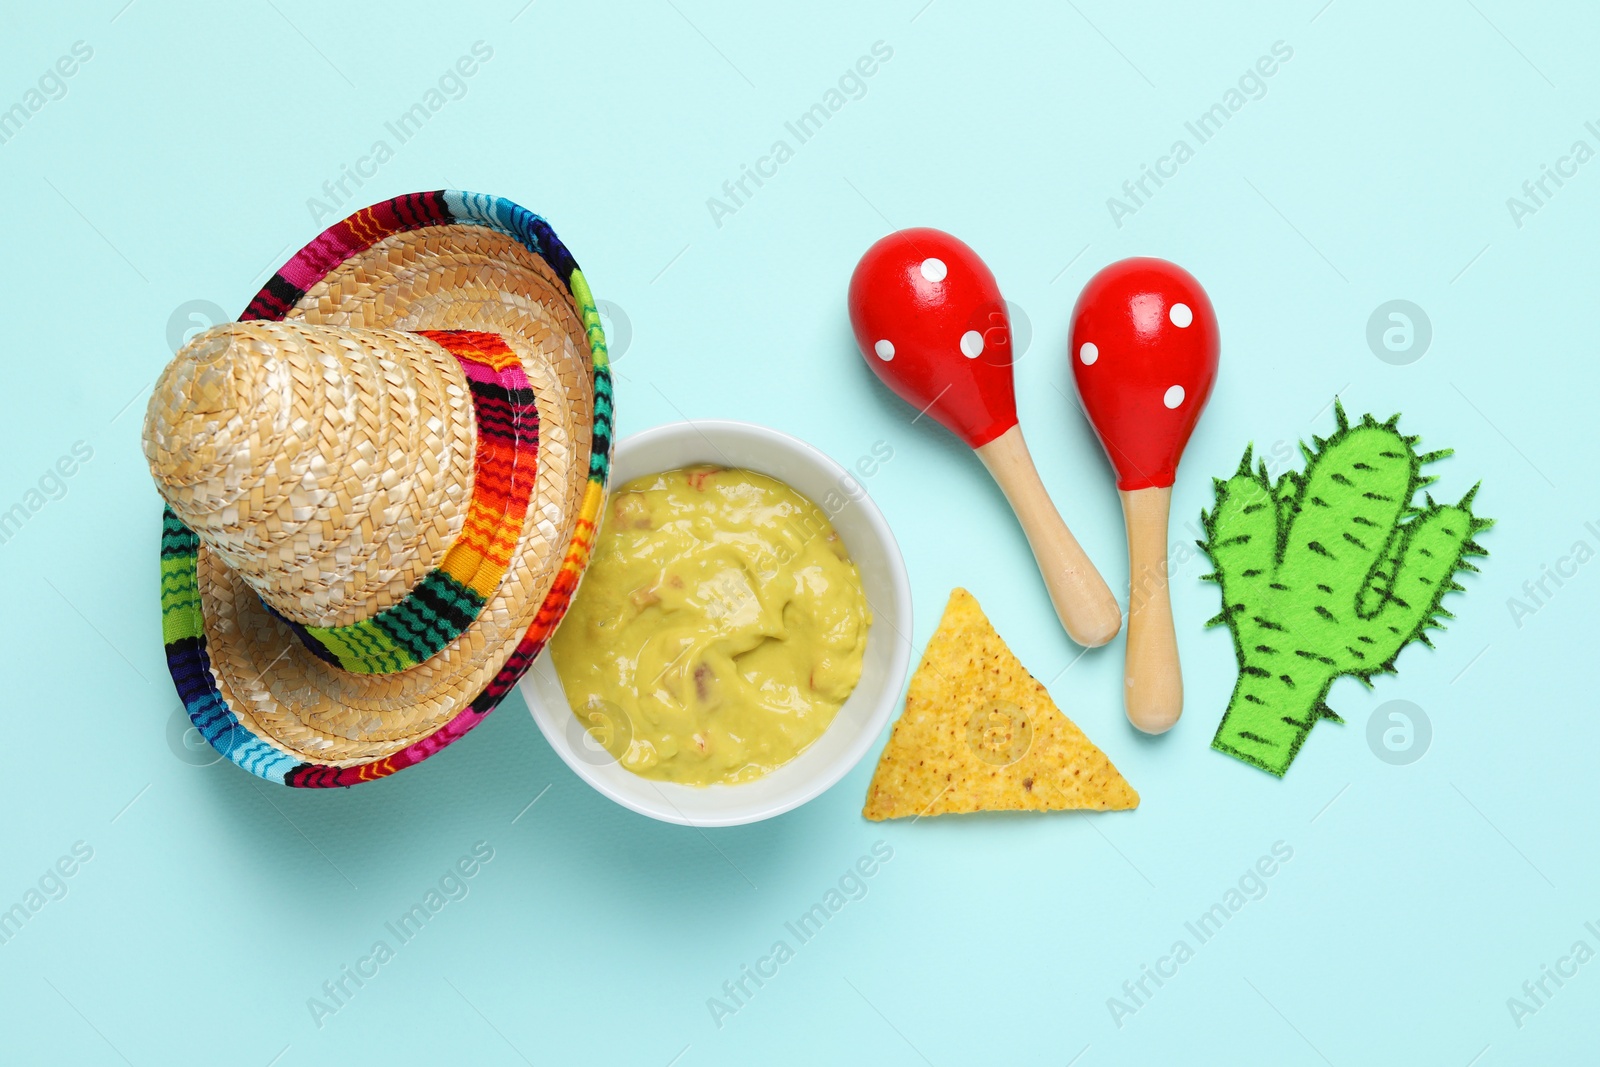 Photo of Mexican sombrero hat, guacamole, nachos chip, maracas and paper cactus on light blue background, flat lay